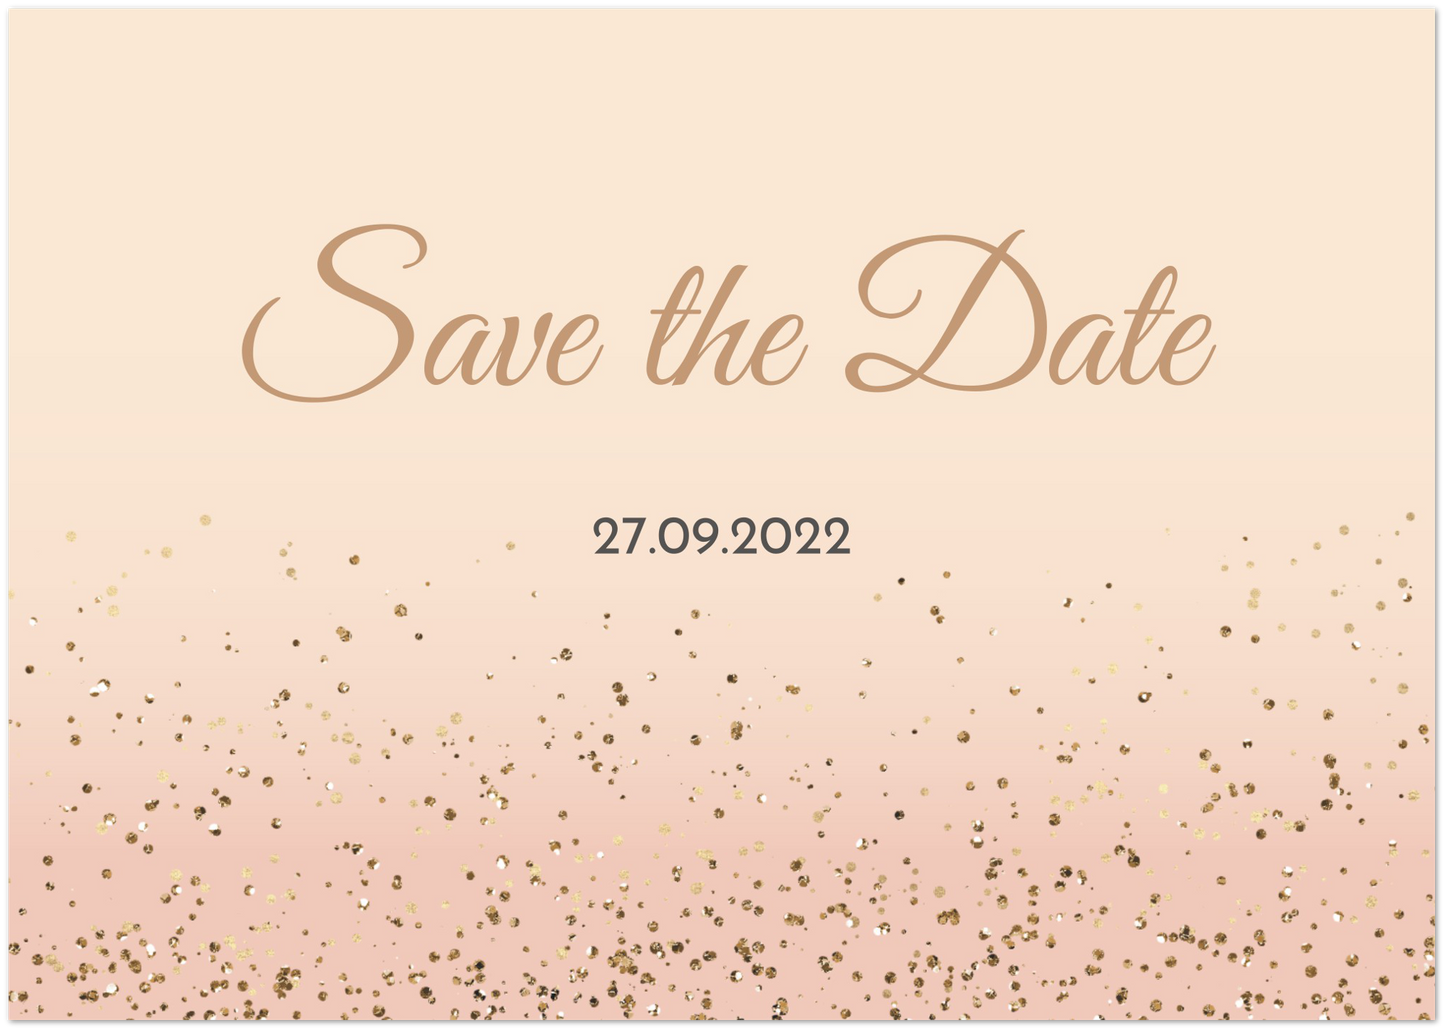 Brown Sparkles Save the Date (sold as packs of 10 cards, flat, with white envelopes)